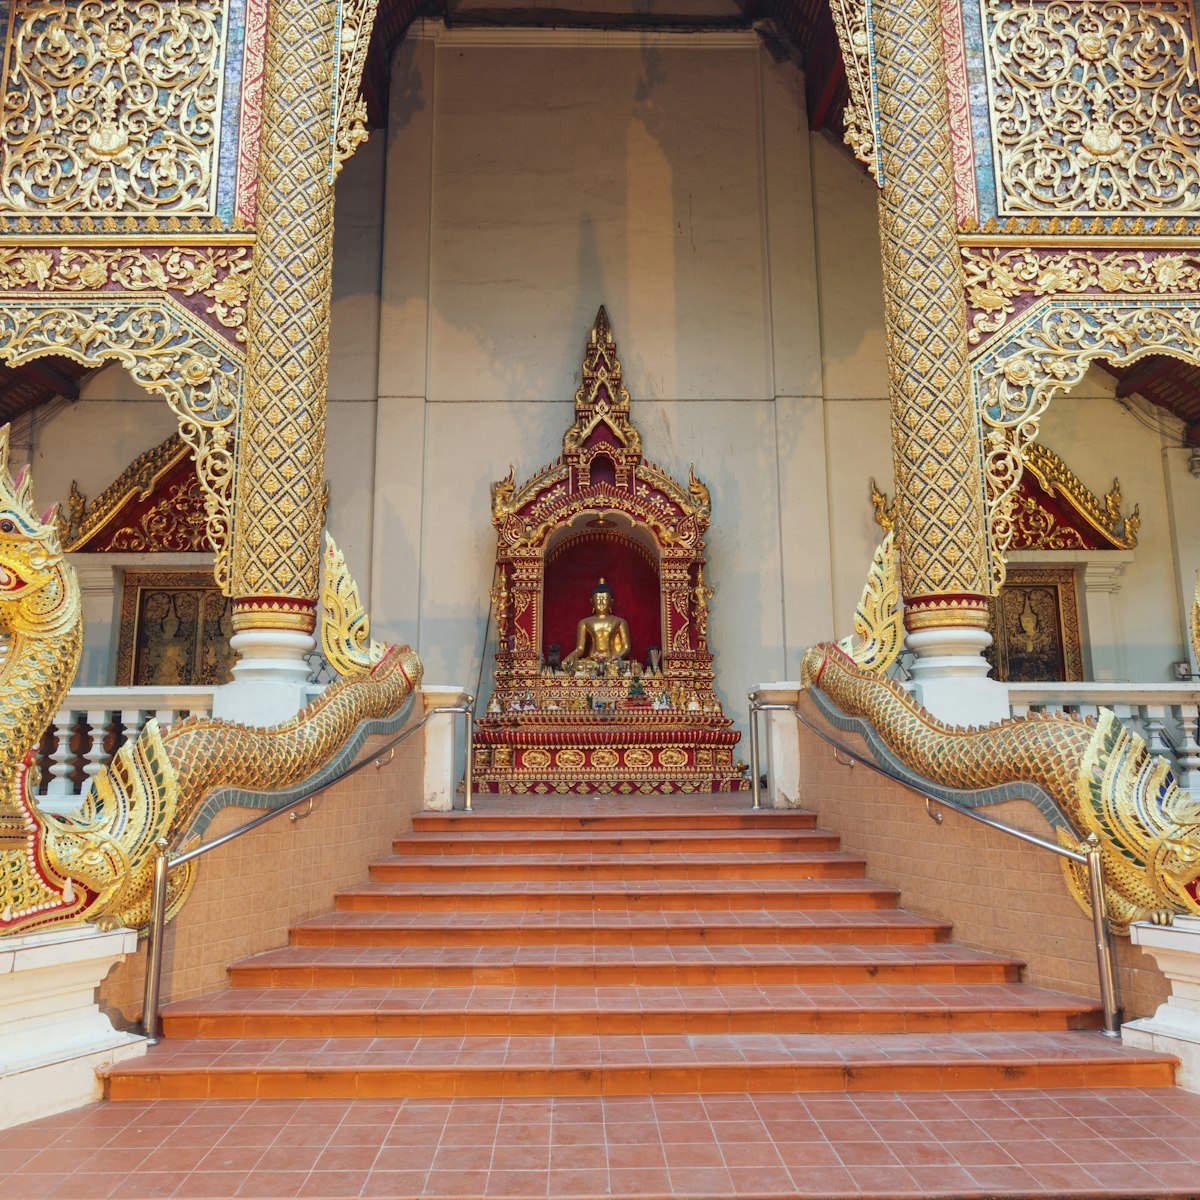 Asia, Thailand, Chiang Mai Province, Wat Phra Singh temple. (Photo by: JTB Photo/UIG via Getty Images)